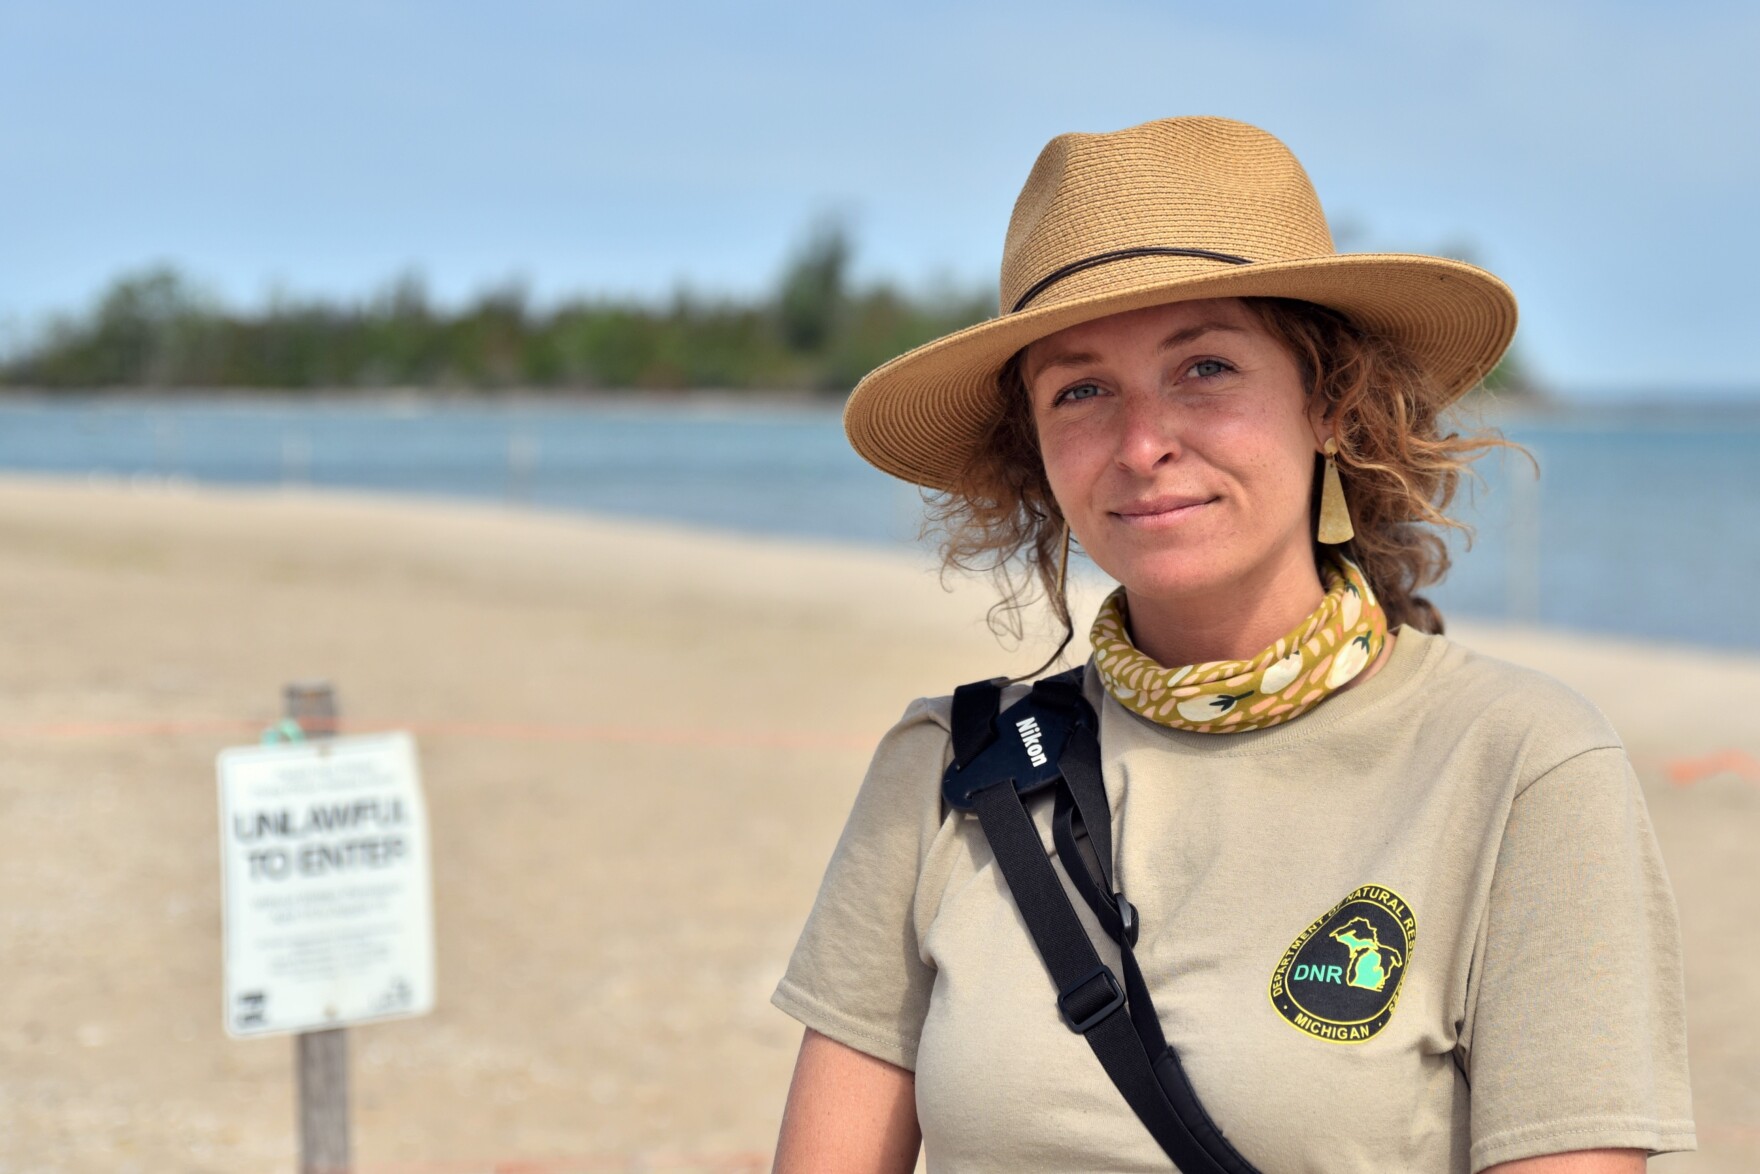 a young white woman standing on the beach with water behind her wearing a national park t-shirt and a wide brimmed hat smiles at the camera